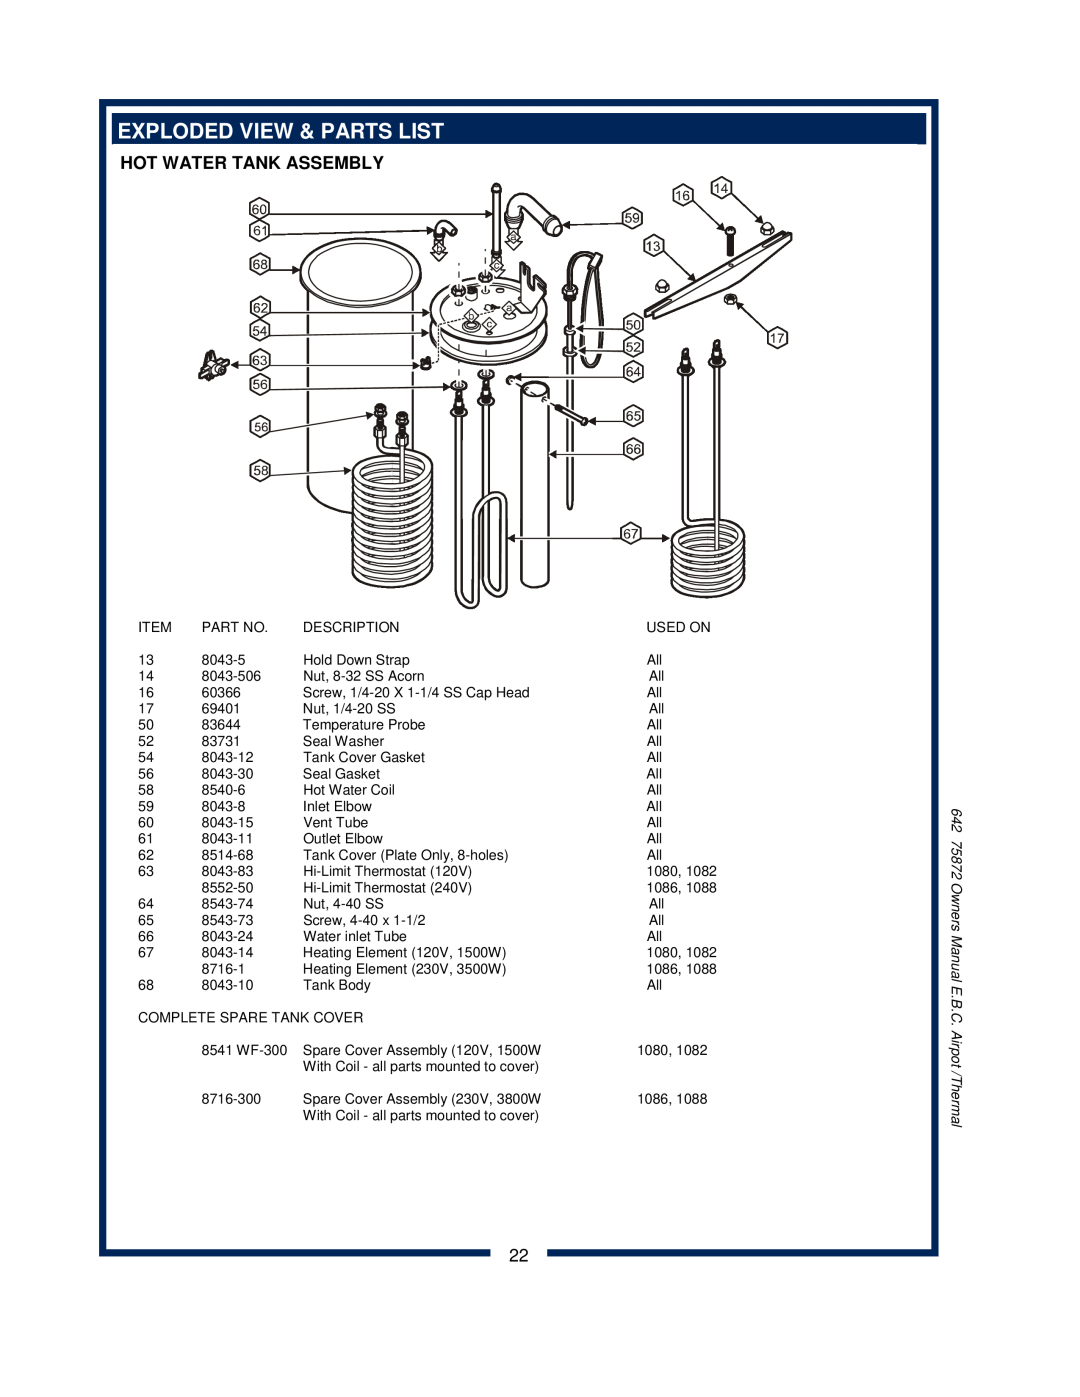 Bloomfield 1088, 1086, 1080, 1082XL owner manual Exploded View & Parts List, Hot Water Tank Assembly 